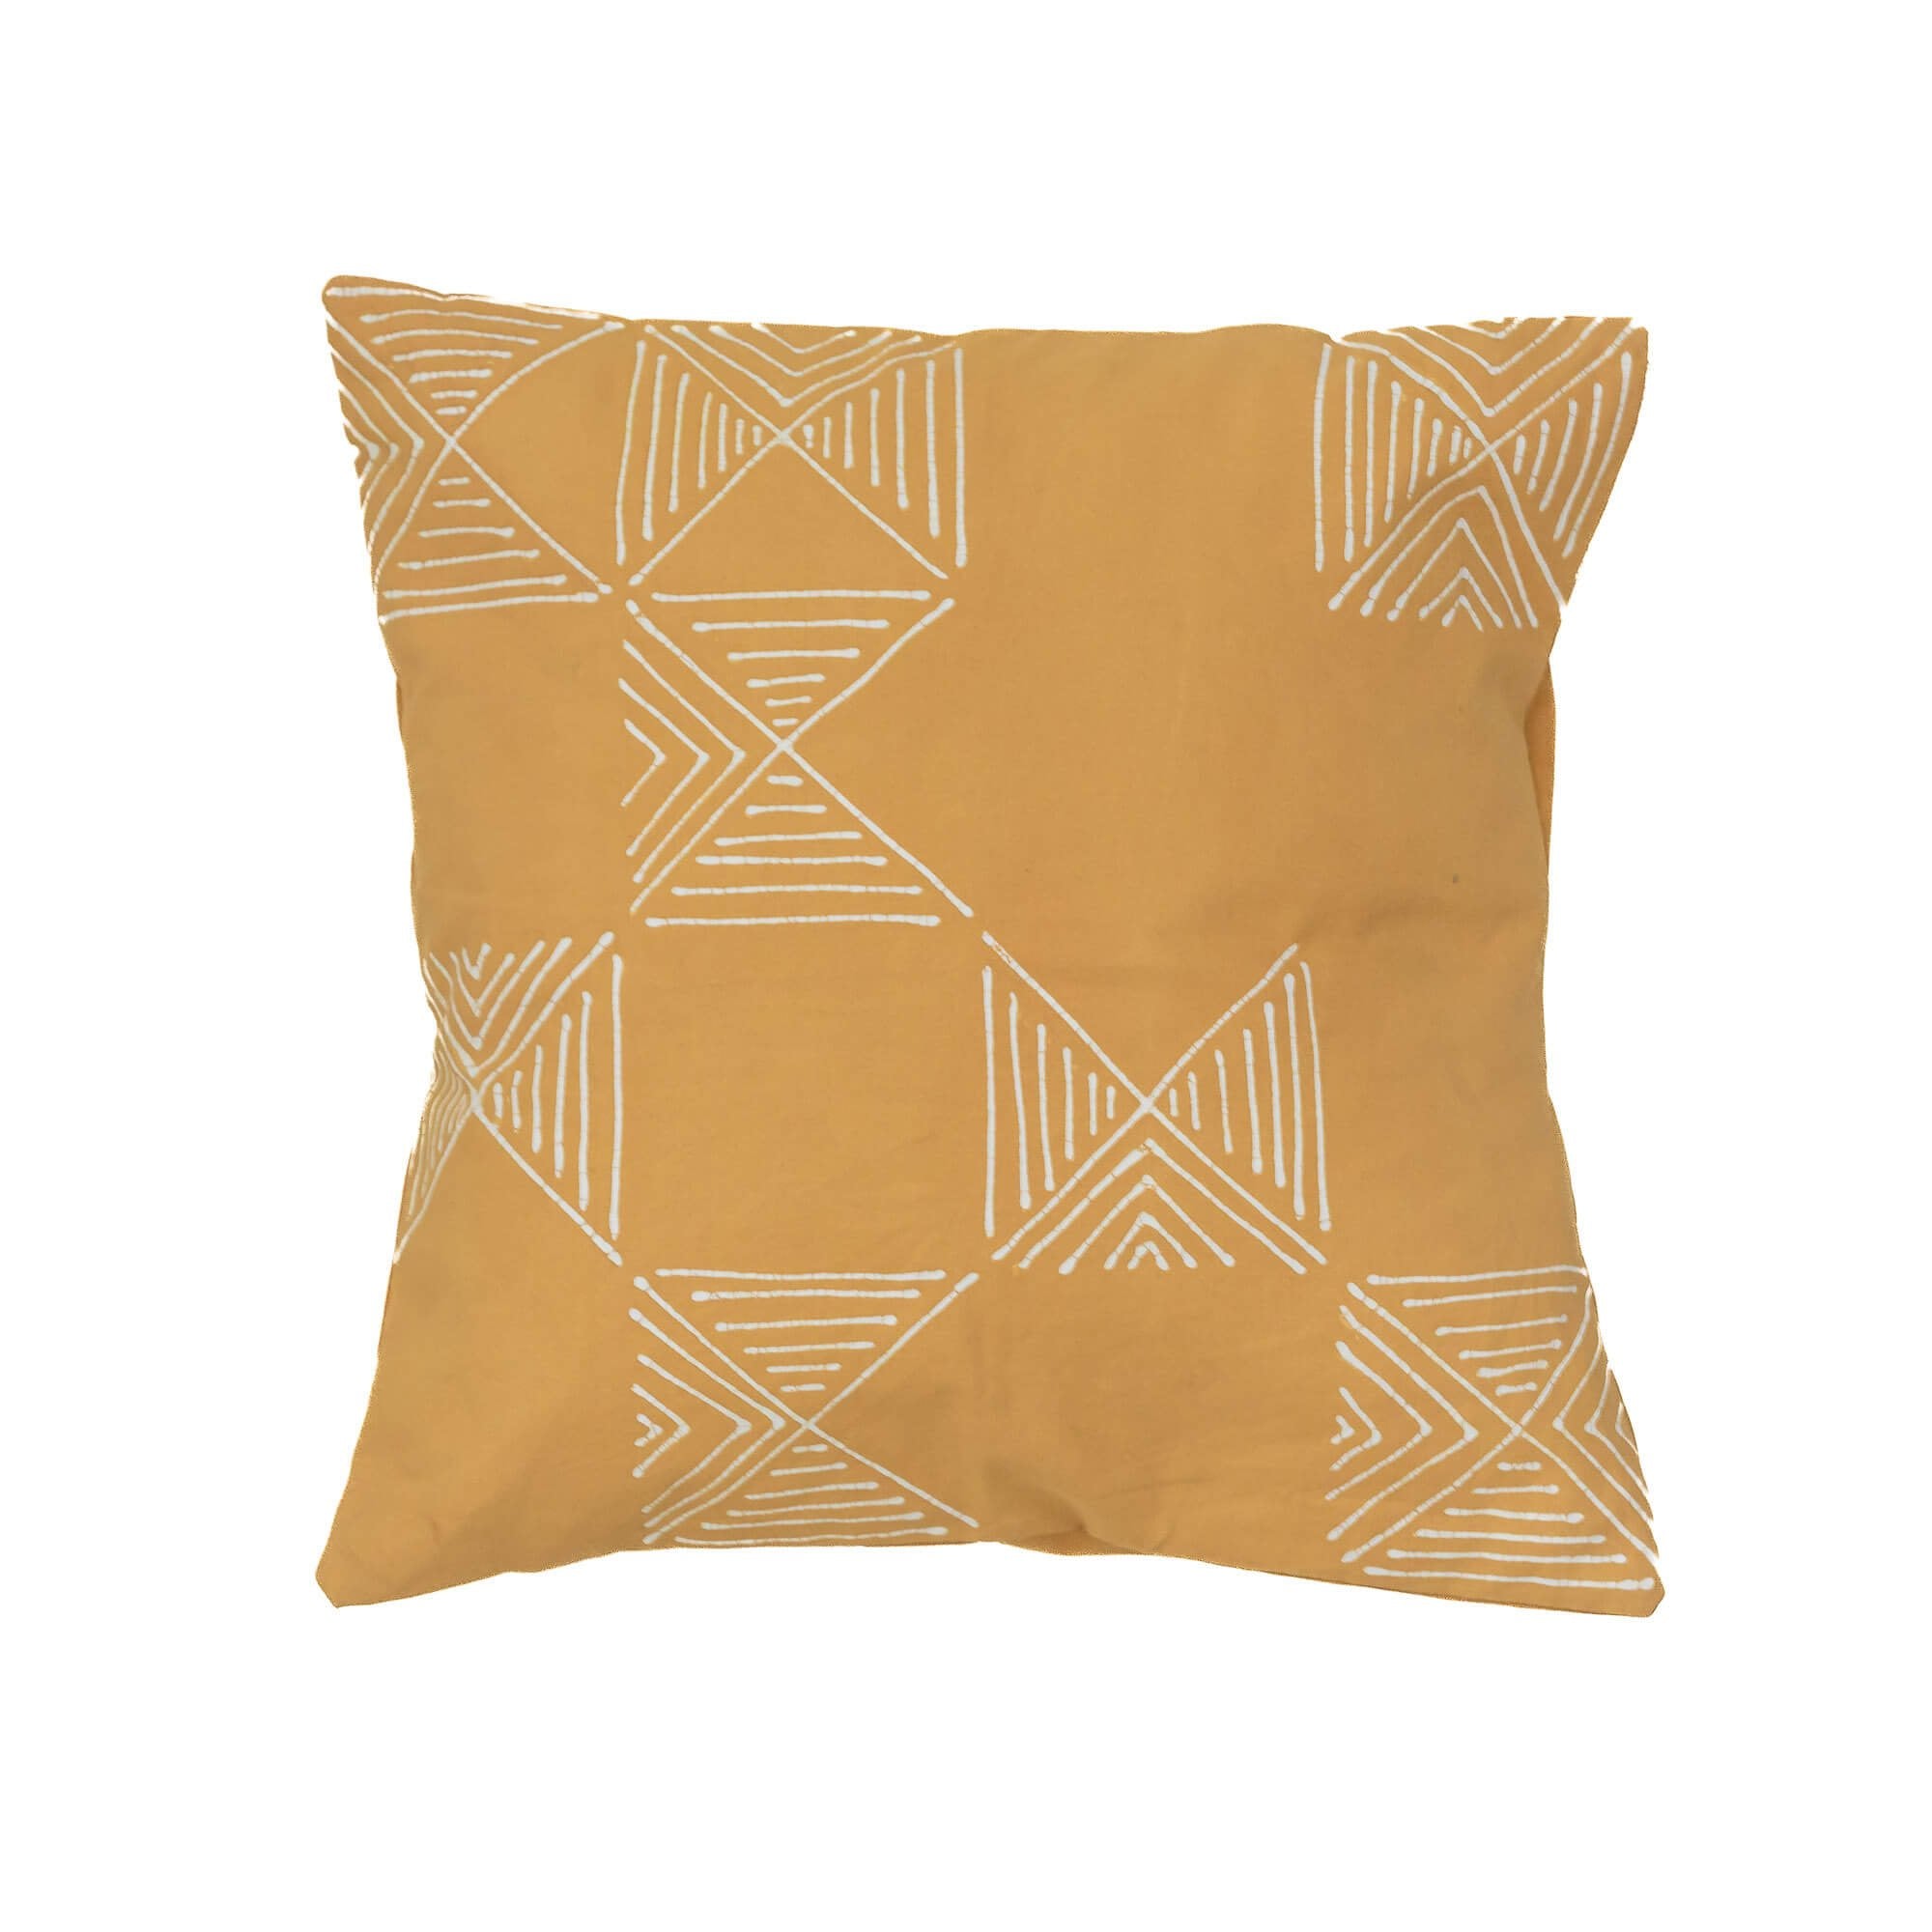 Matika Mustard Grid Cushion Cover - Hand Painted by TRIBAL TEXTILES - Handcrafted Home Decor Interiors - African Made